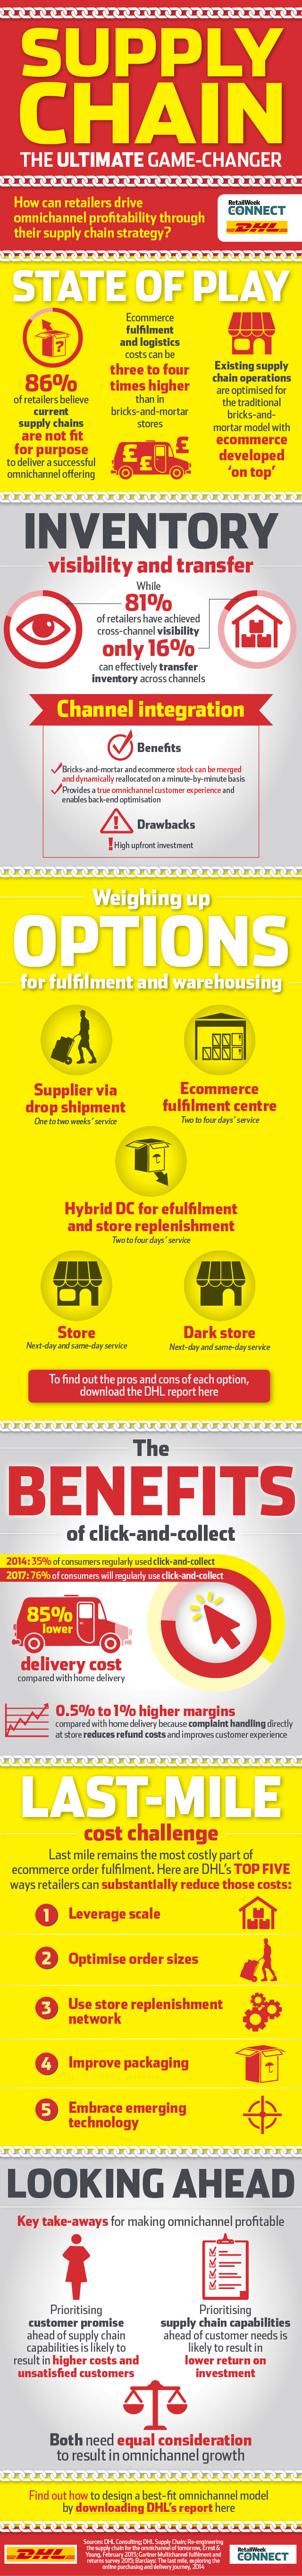 DHL infographic